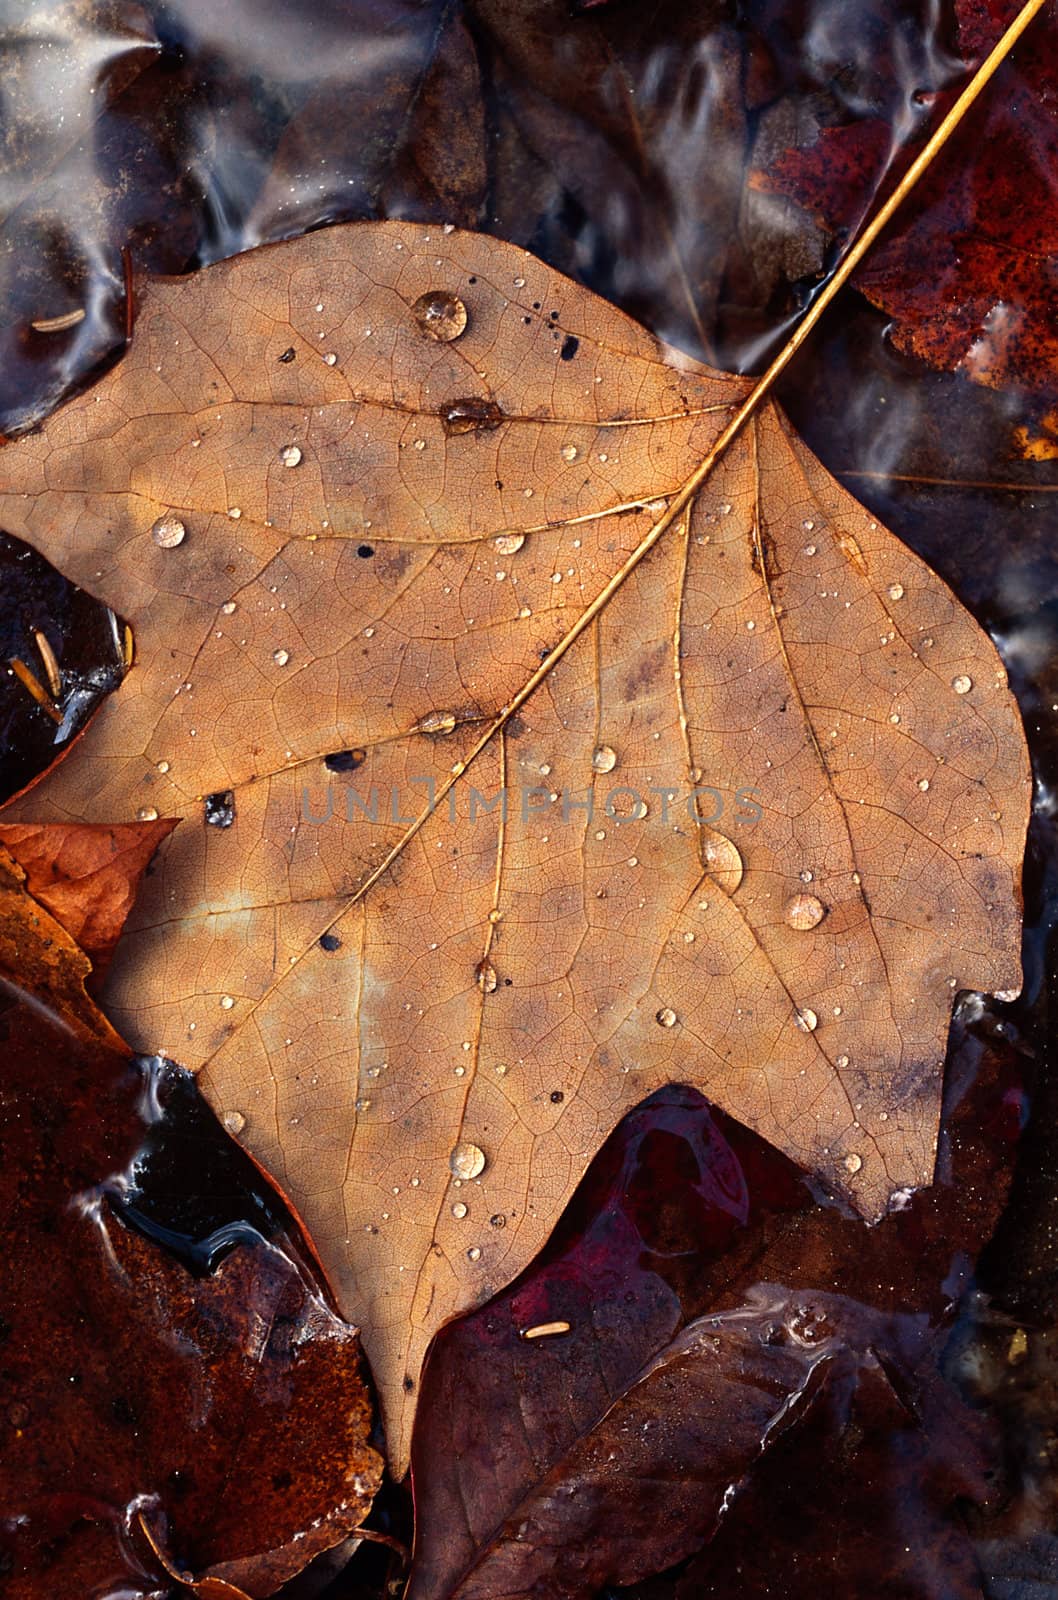 Poplar leaf and water droplets by Wolfsnap